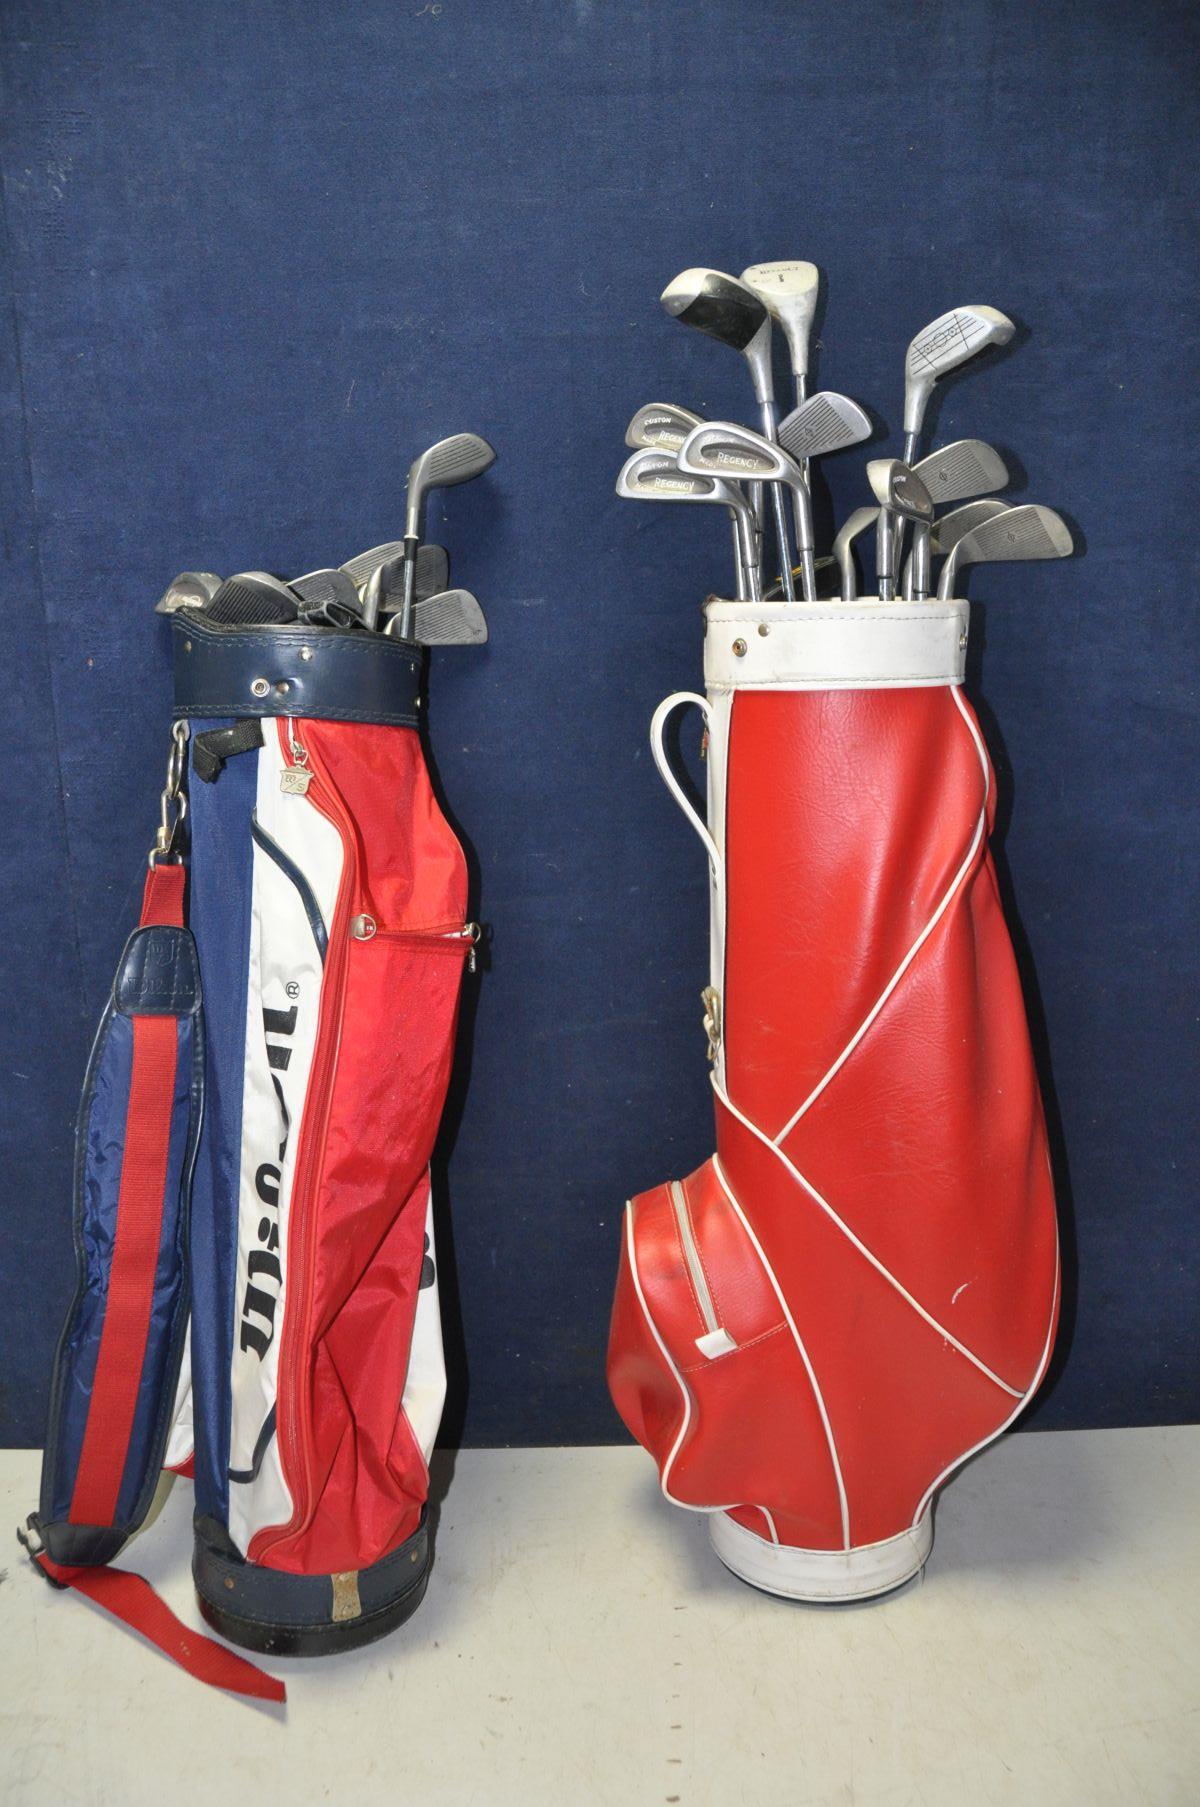 TWO GOLF BAGS CONTAINING CLUBS to include a Wilson golf bag with a set of Apollo clubs, a Karobes